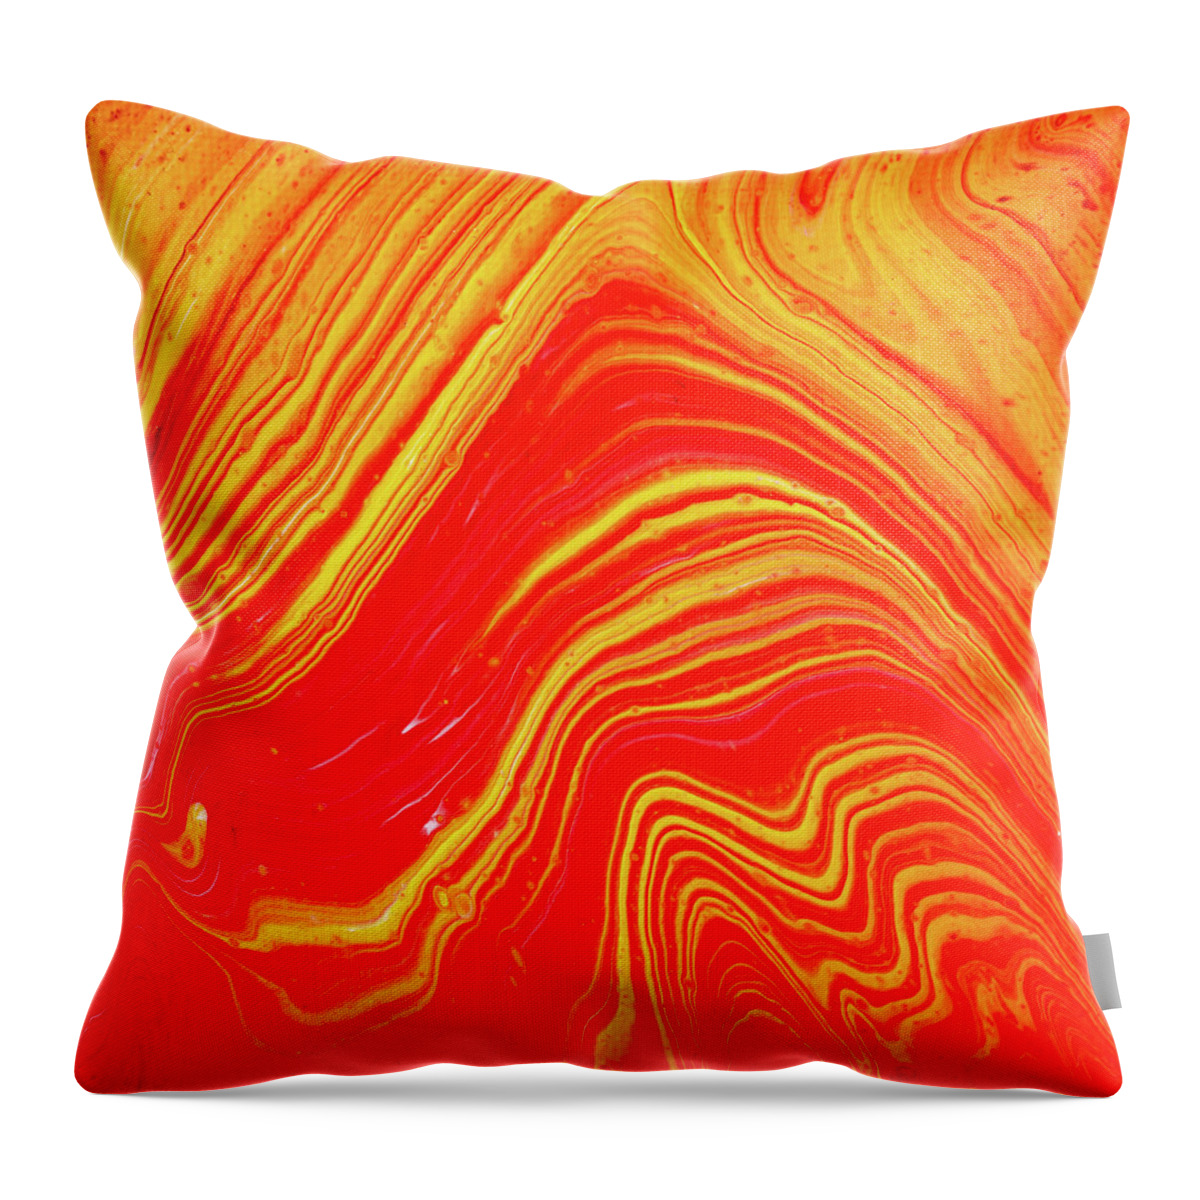 Abstract Throw Pillow featuring the painting Red and Orange Abstract Acrylic Fluid Art 01 by Matthias Hauser